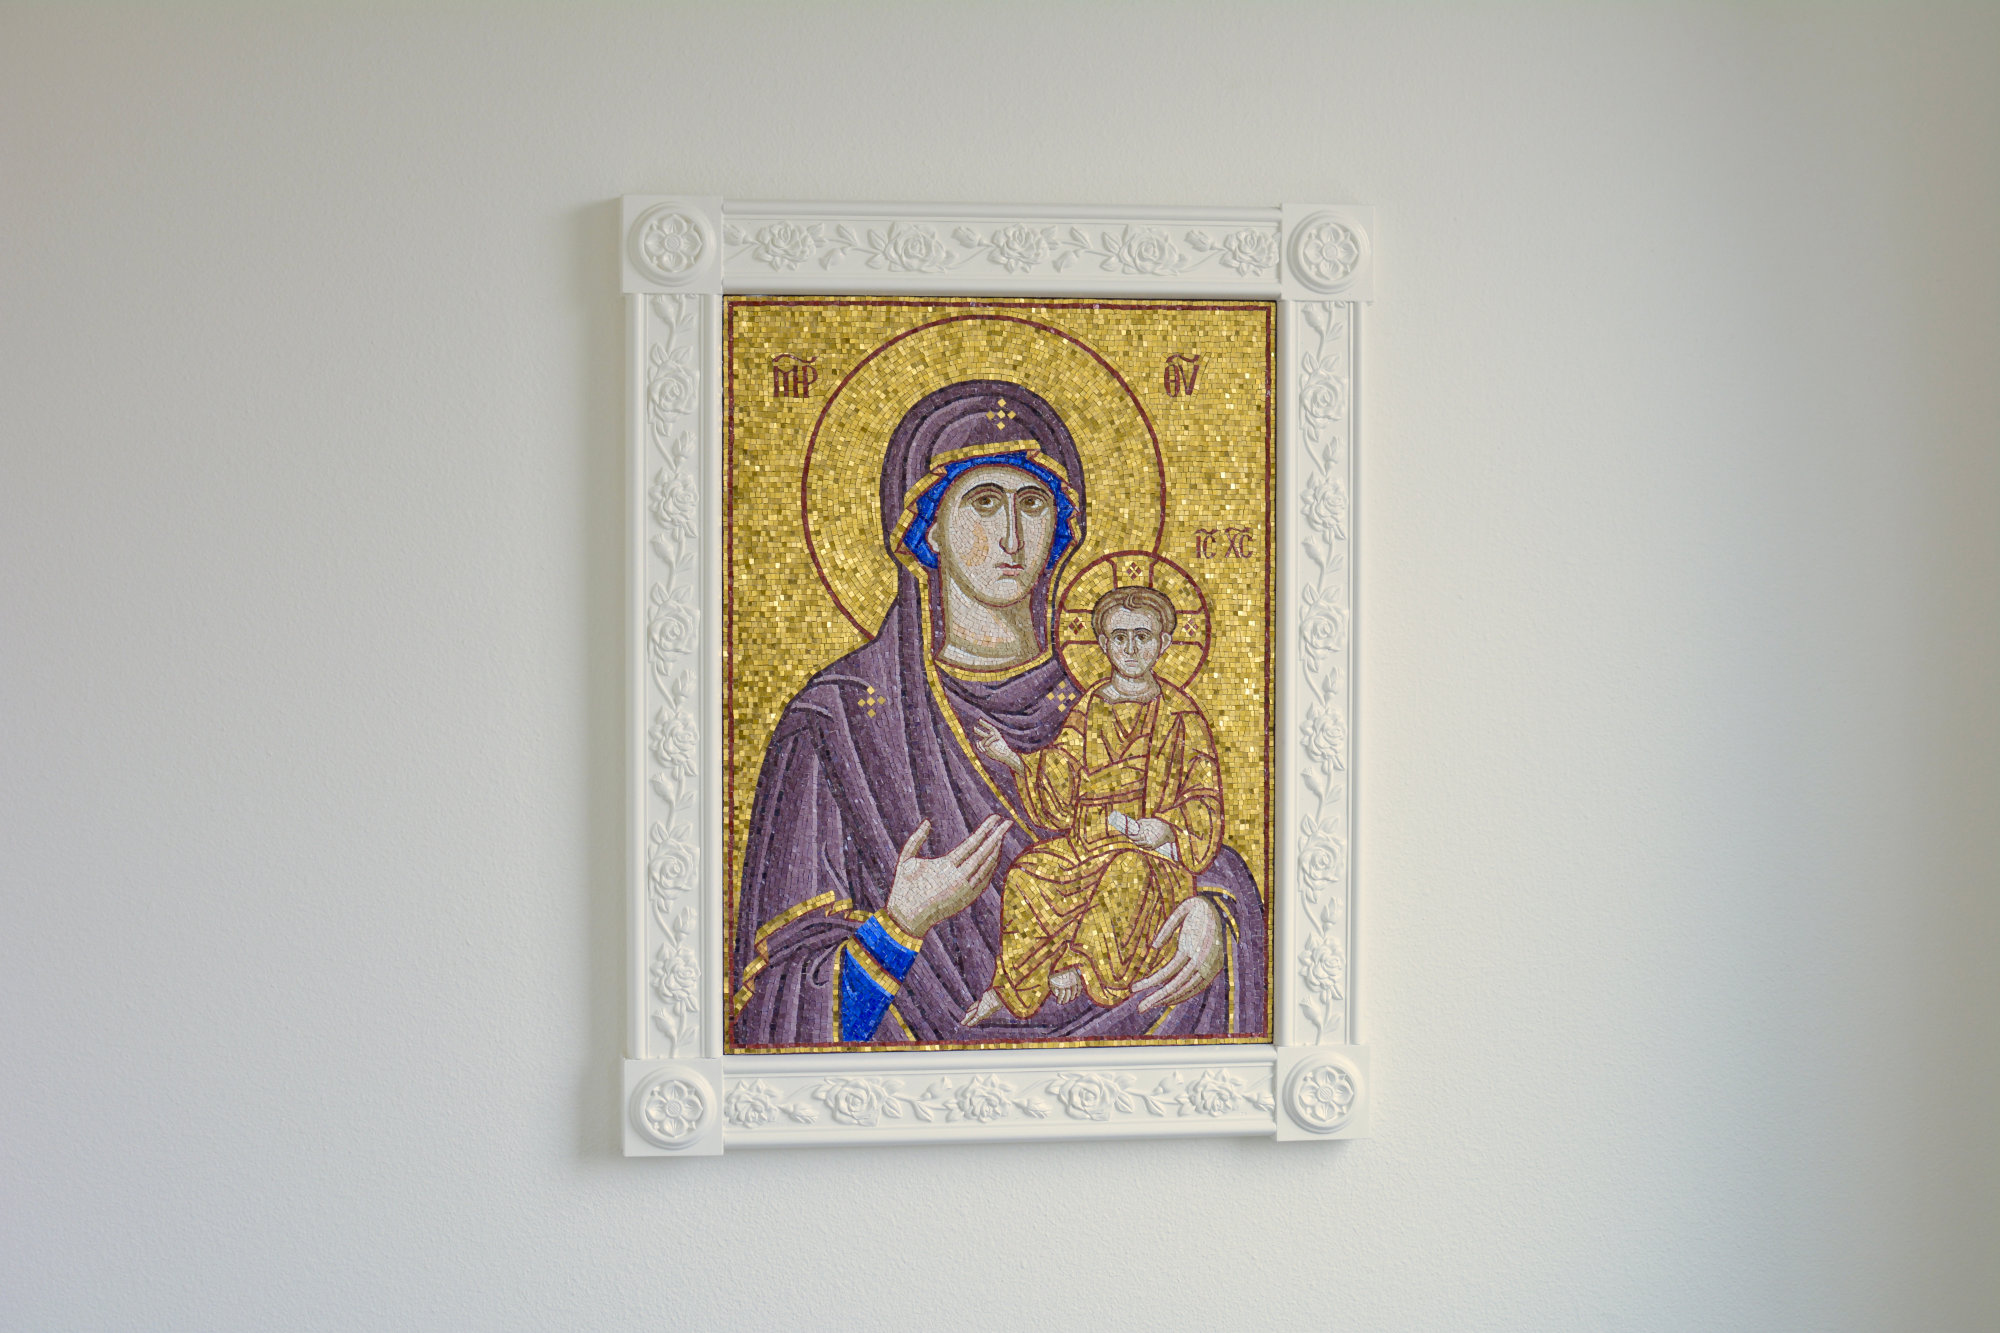 Mosaic of the Mother of God in the Atrium